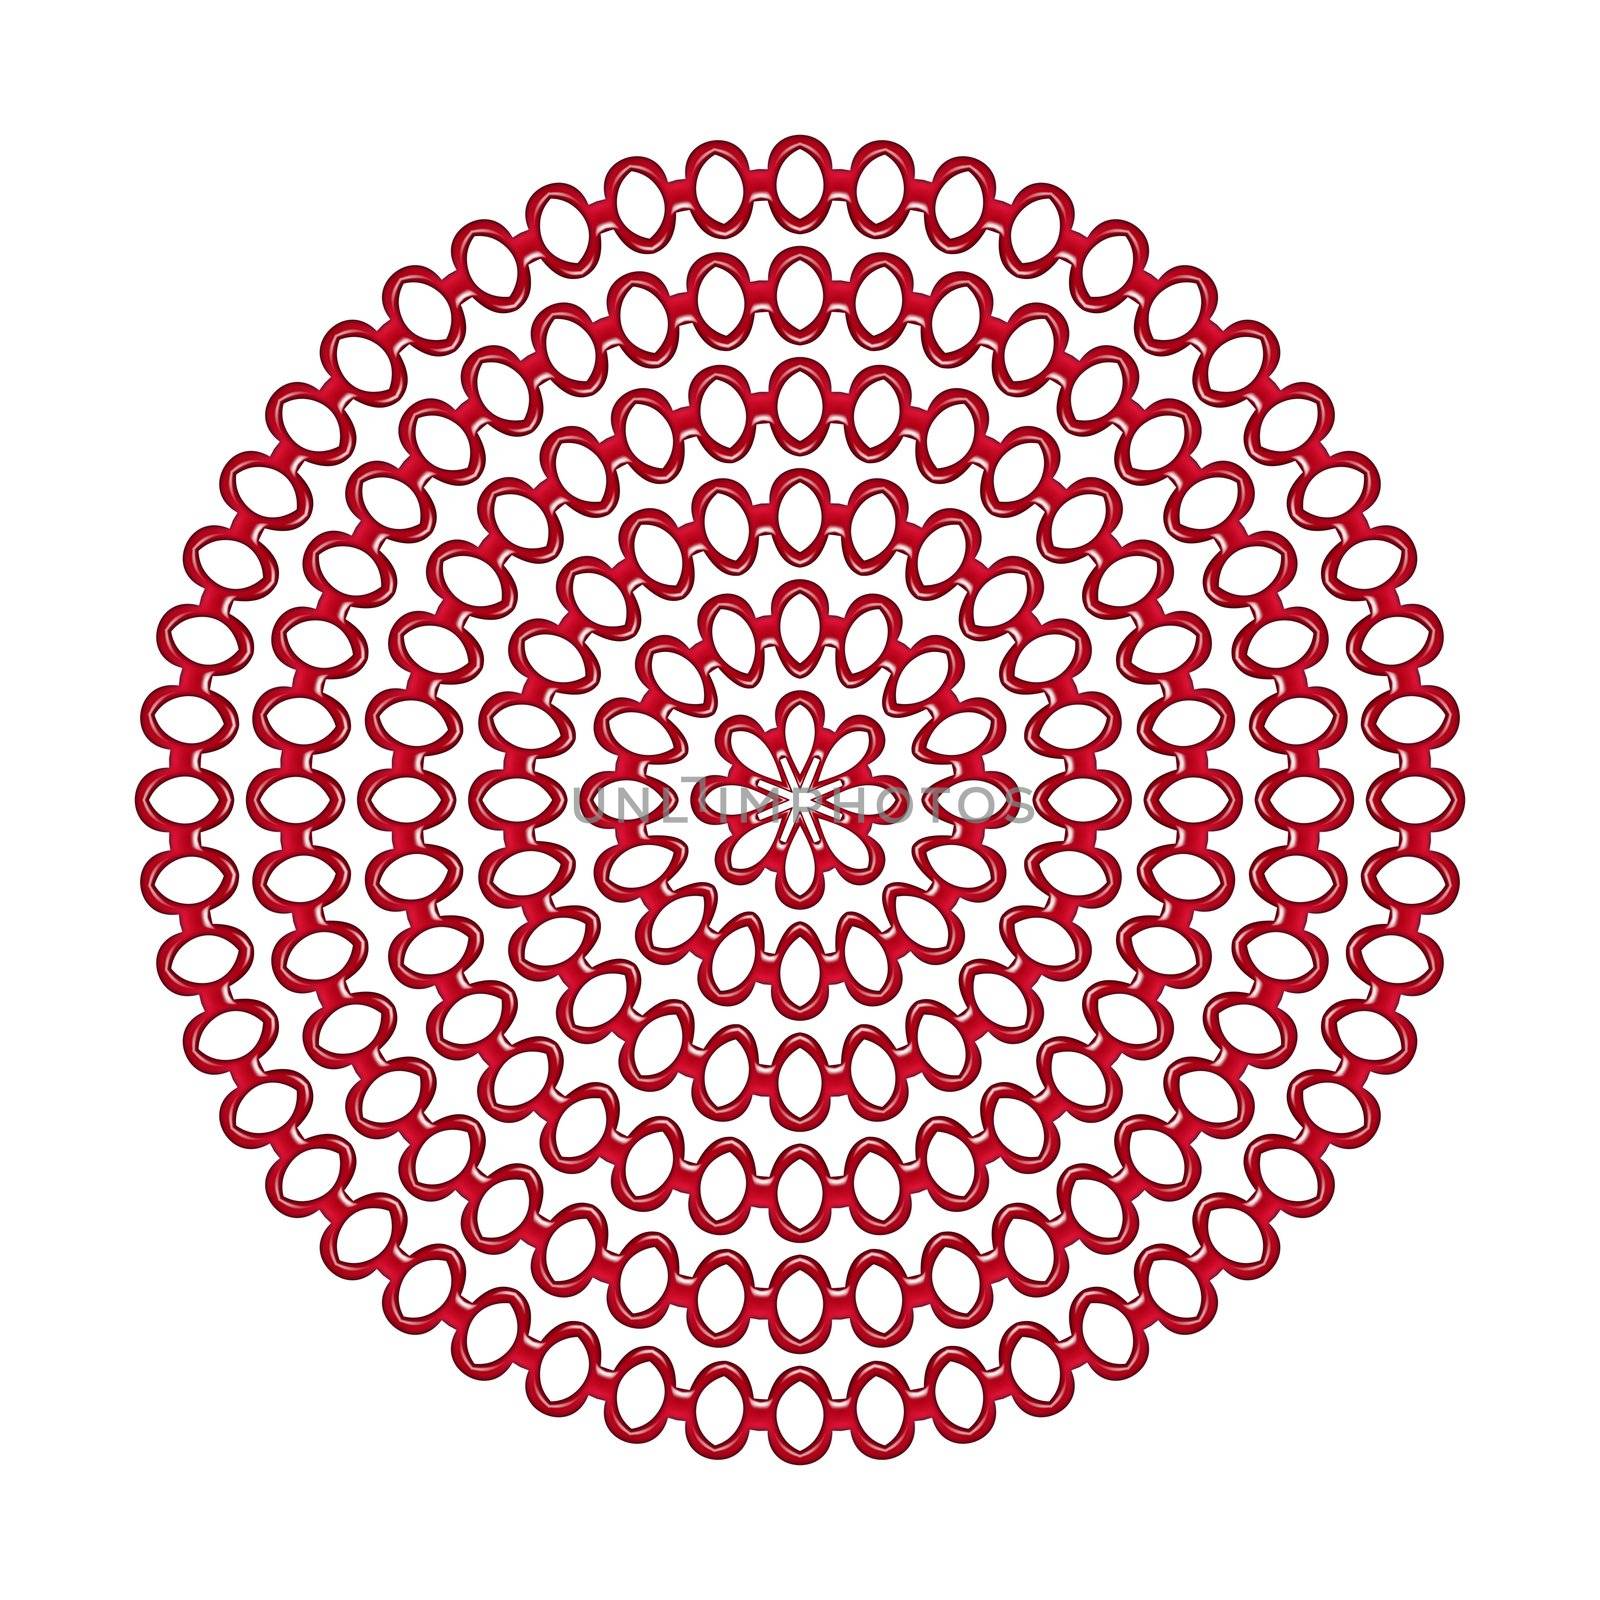 pattern of red 3d rings in circels on white